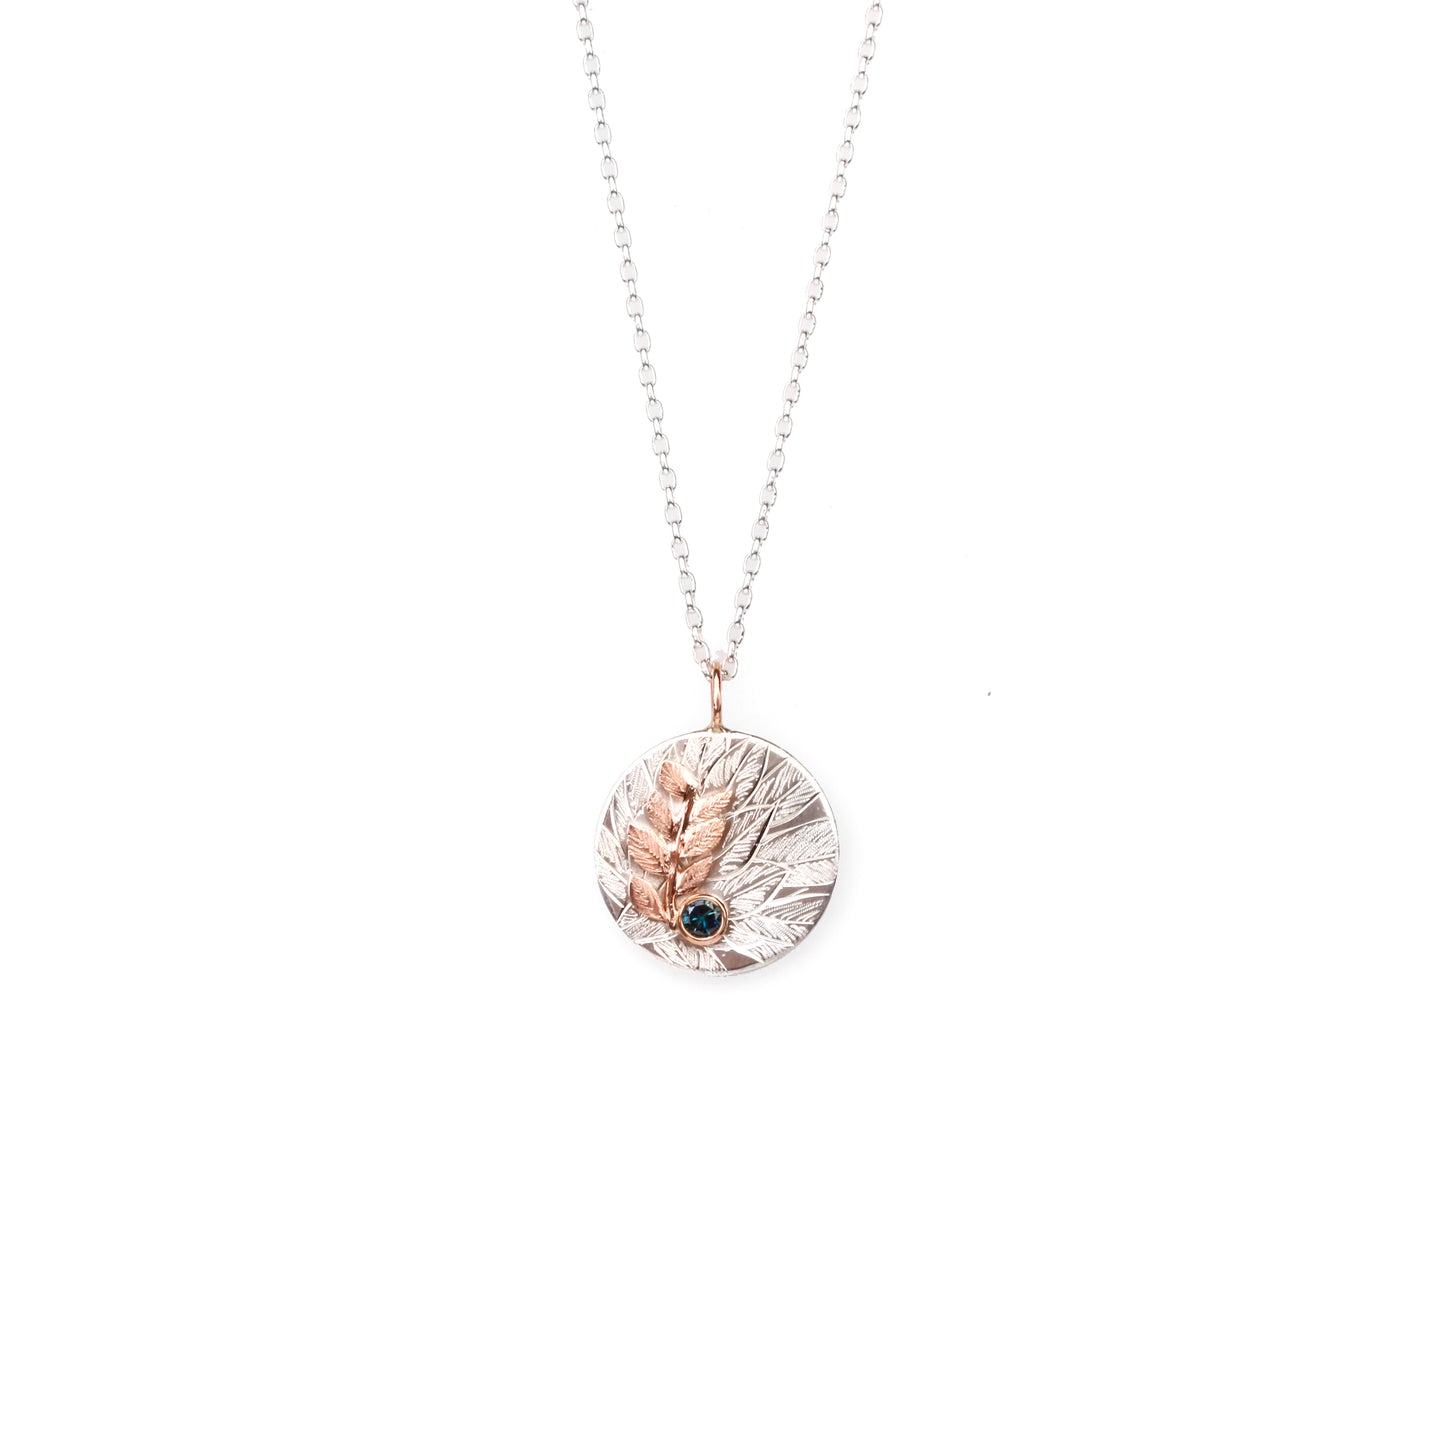 Engraved Foliage Pendant, Sterling silver & 9ct Rose Gold with Australian Parti Sapphire (Round/Teal) with Rose Gold Foliage Stem